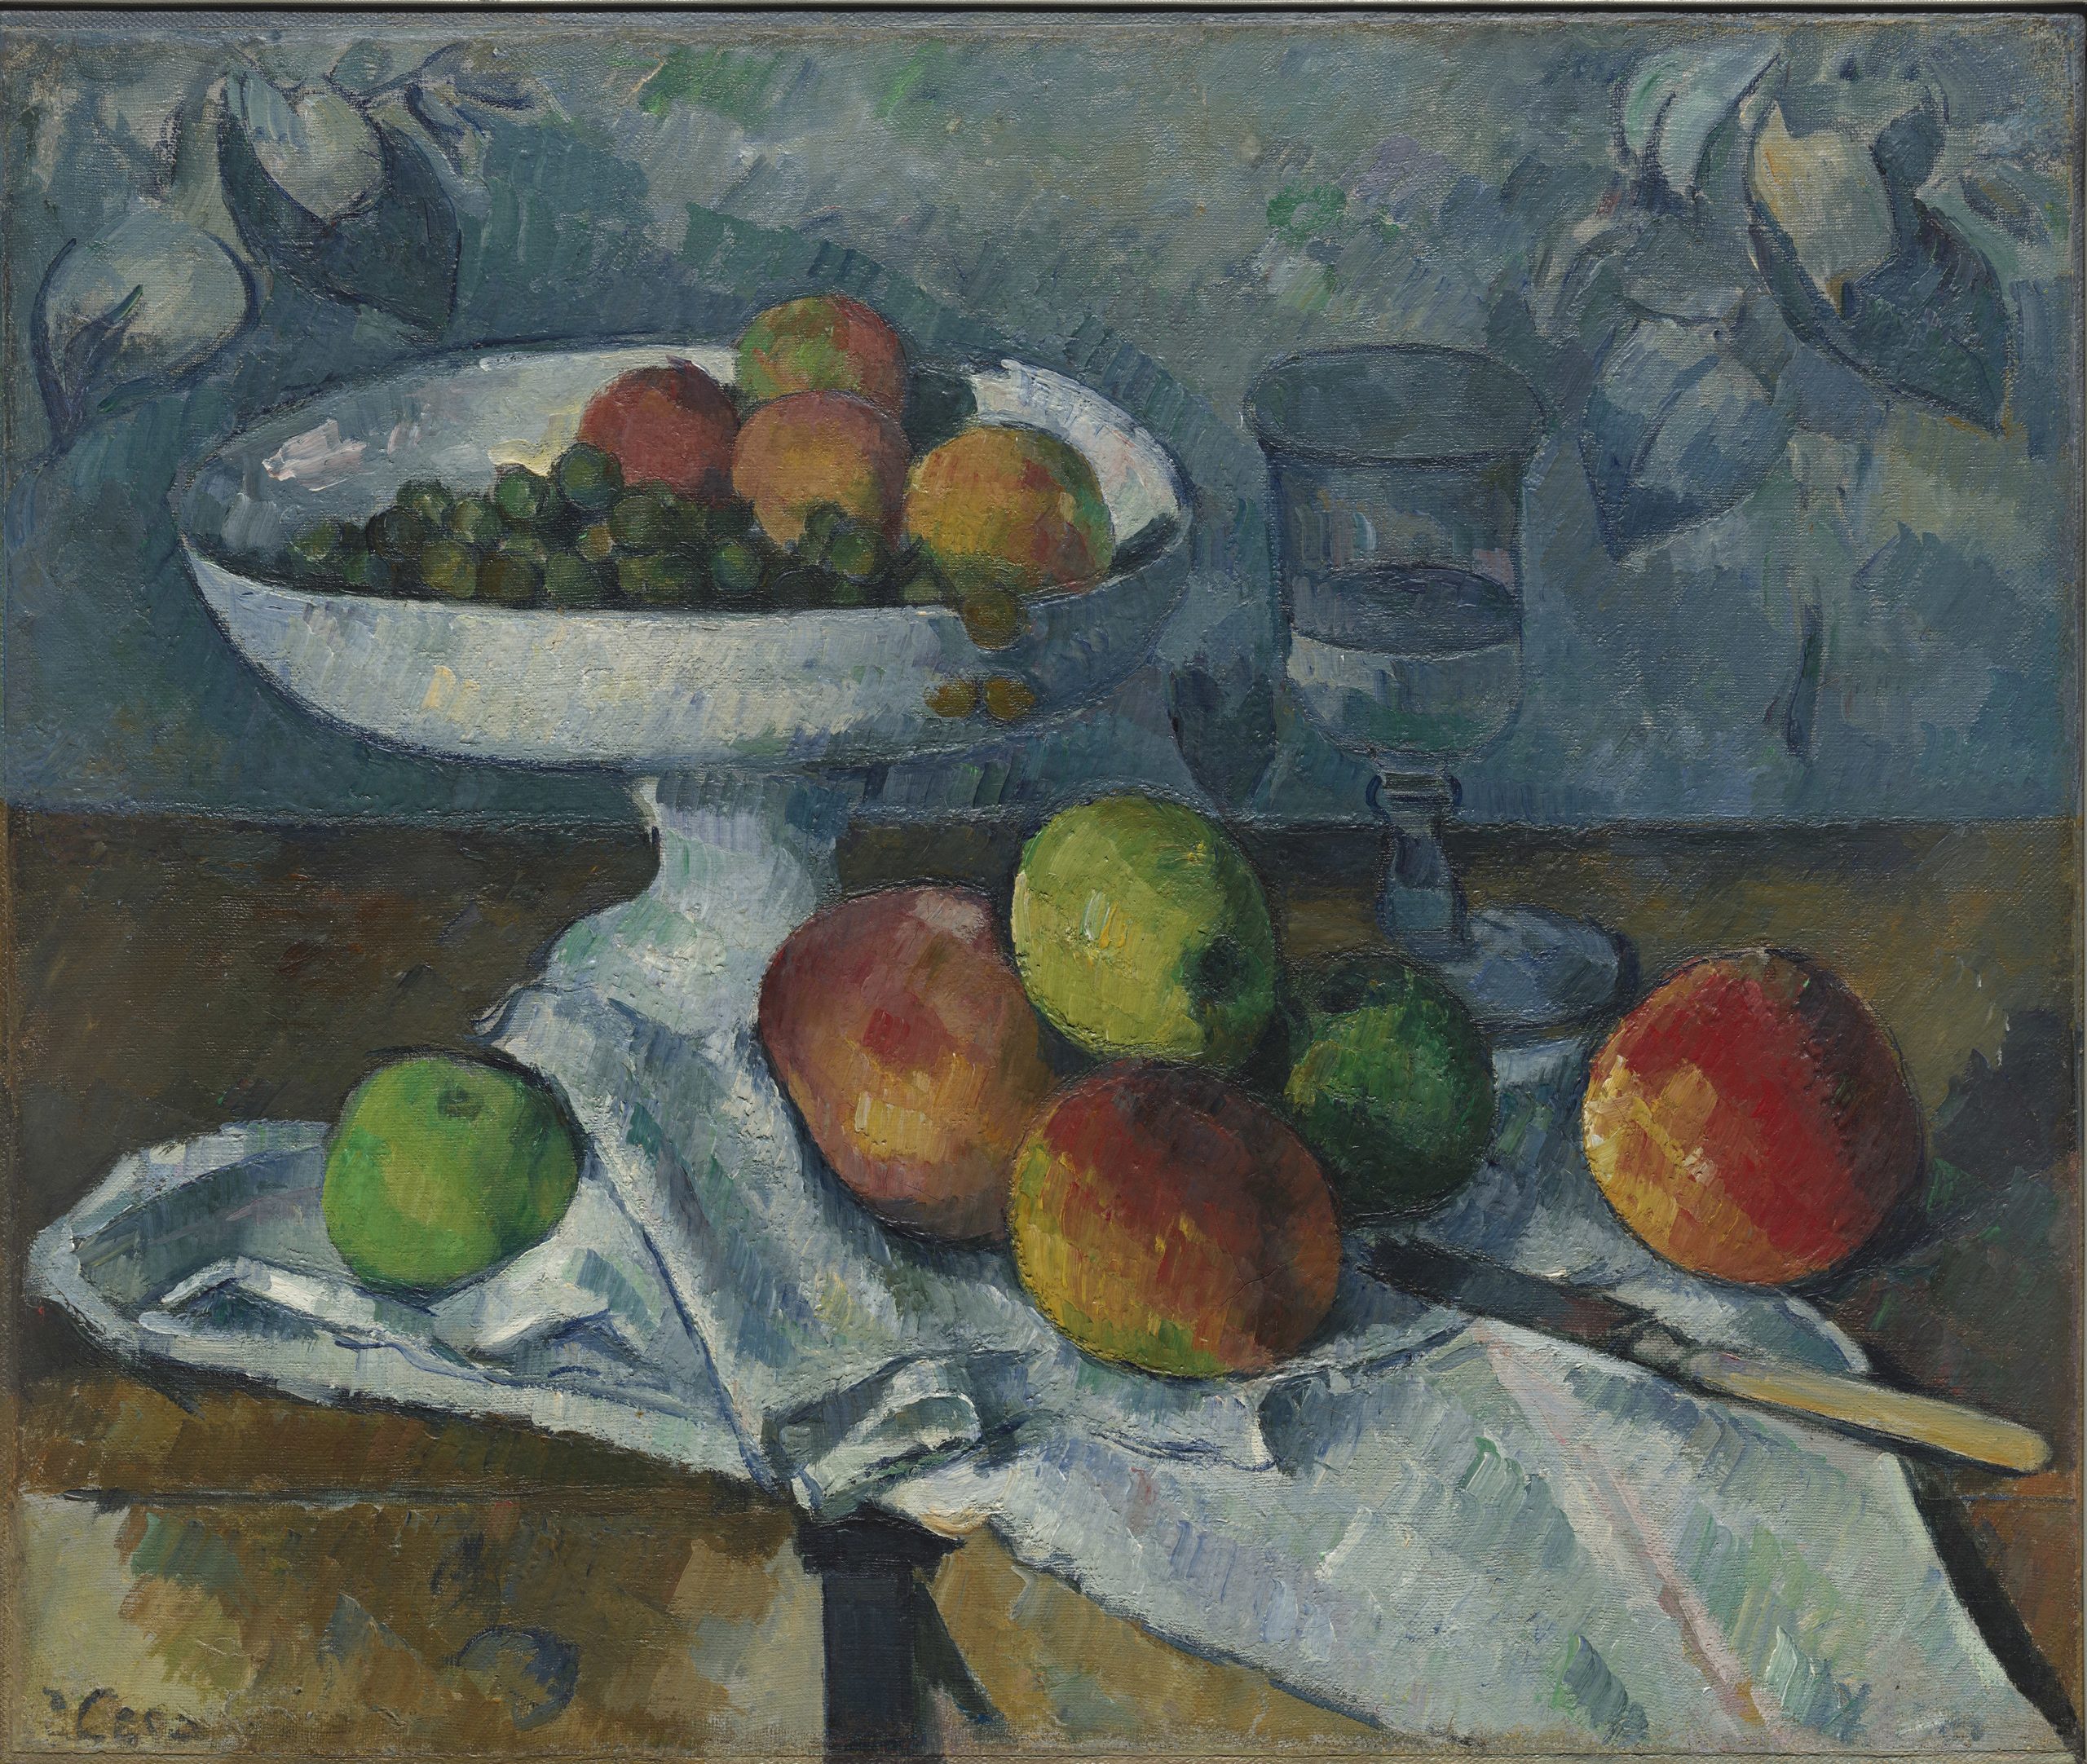 Cezanne, Paul (1839-1906): Still Life with Fruit Dish, 1879-80 New York Museum of Modern Art (MoMA) *** Permission for usage must be provided in writing from Scala.